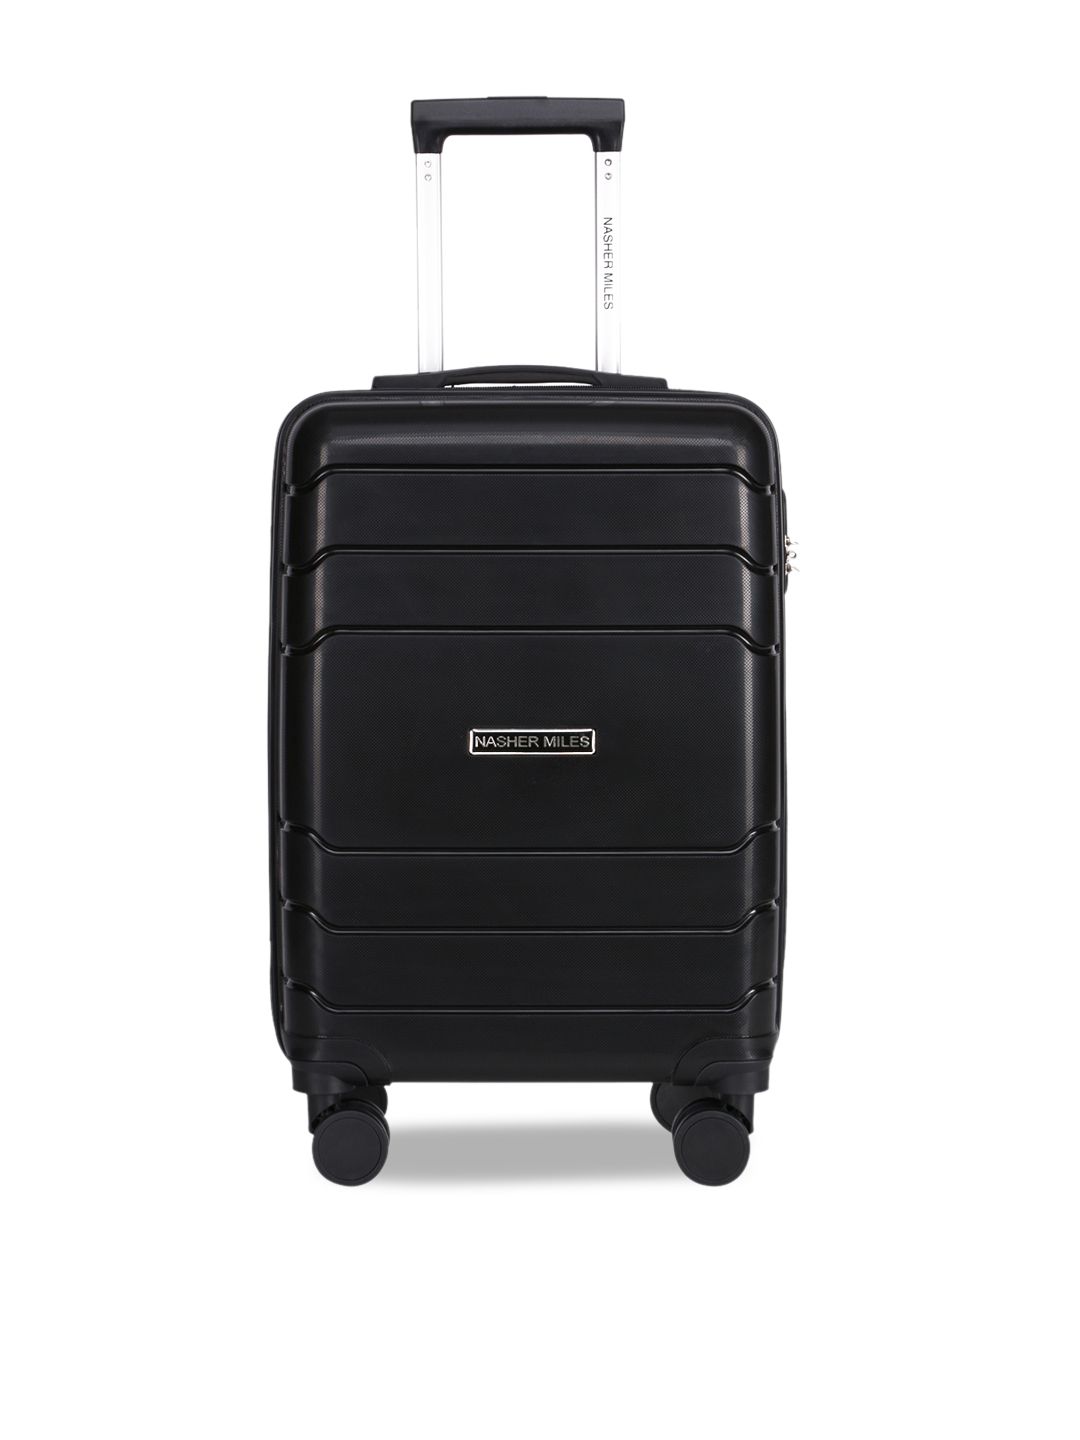 Nasher Miles Black Patterned Hard-Sided Cabin Trolley Bag Price in India